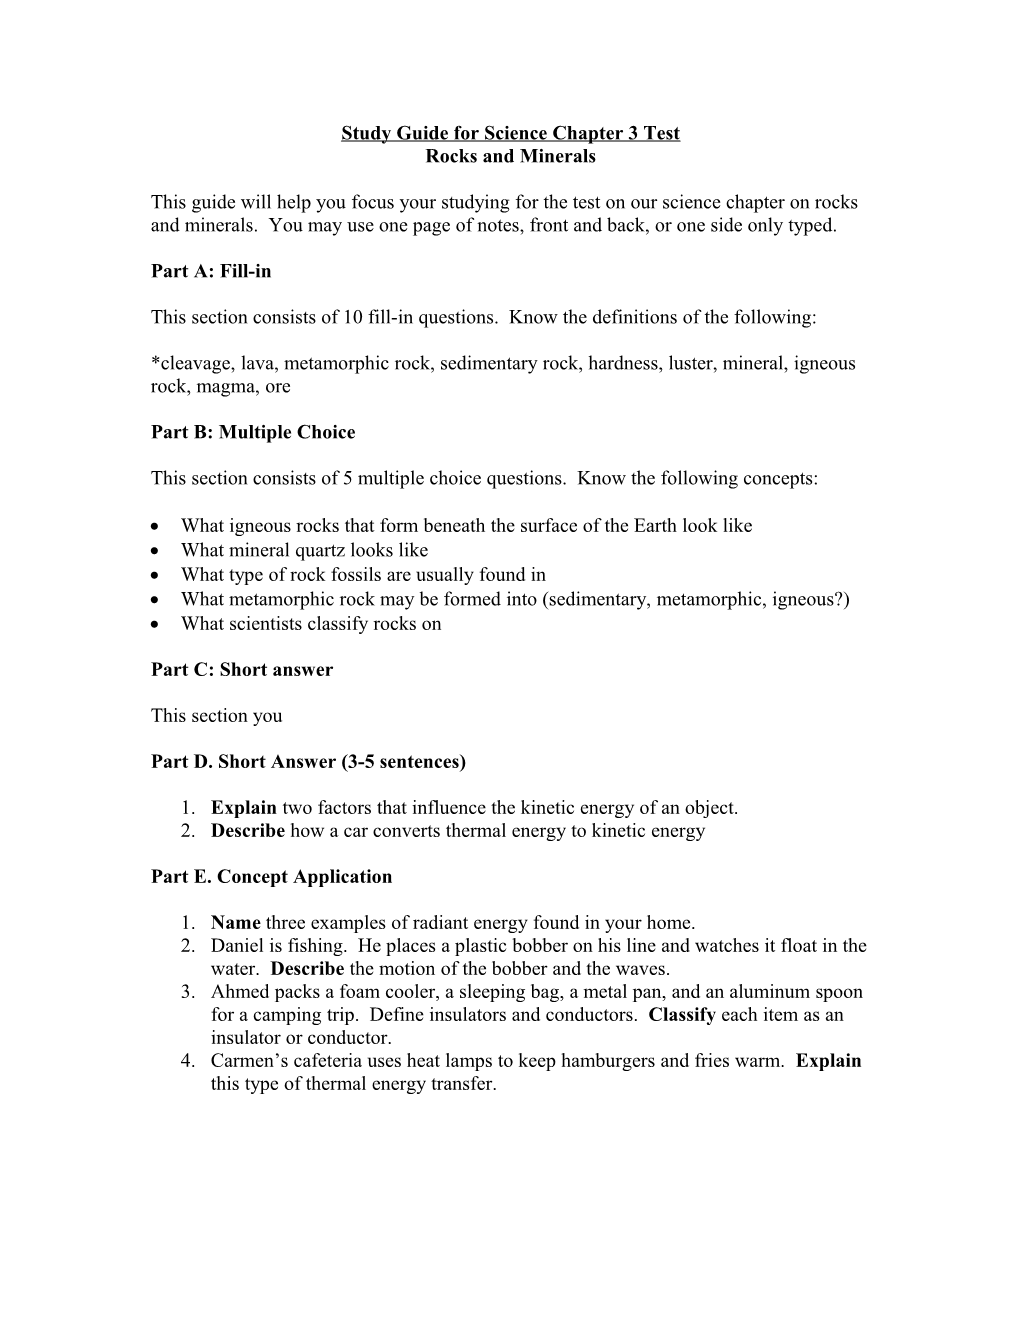 Study Guide For Science Chapter 3 Test